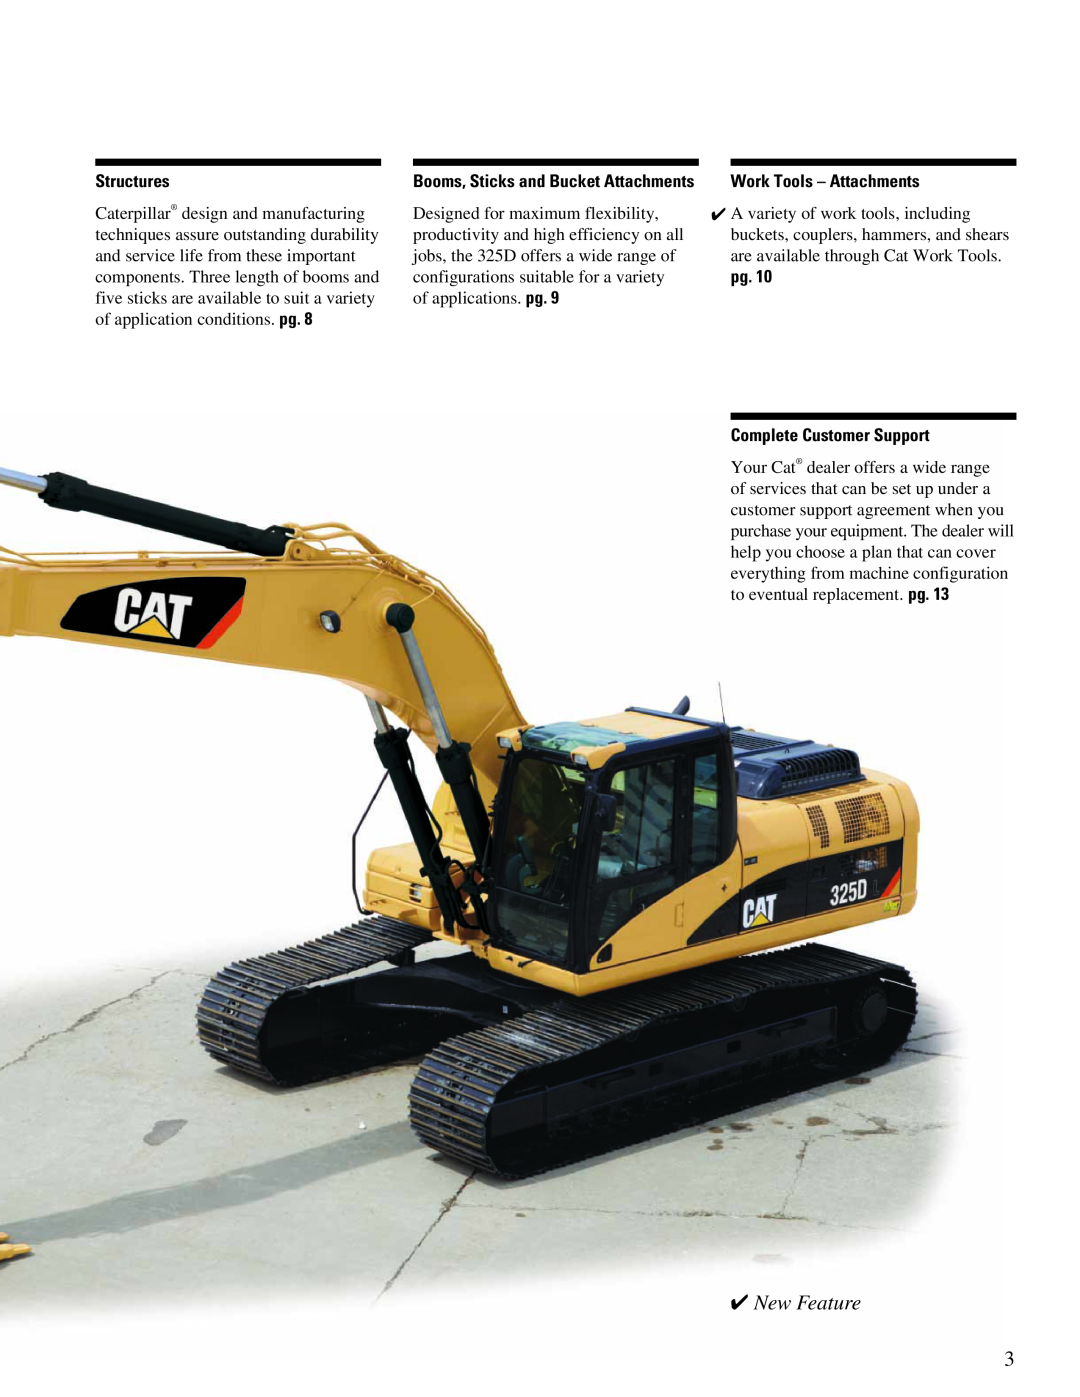 CAT 325DL manual New Feature, Structures, Complete Customer Support 